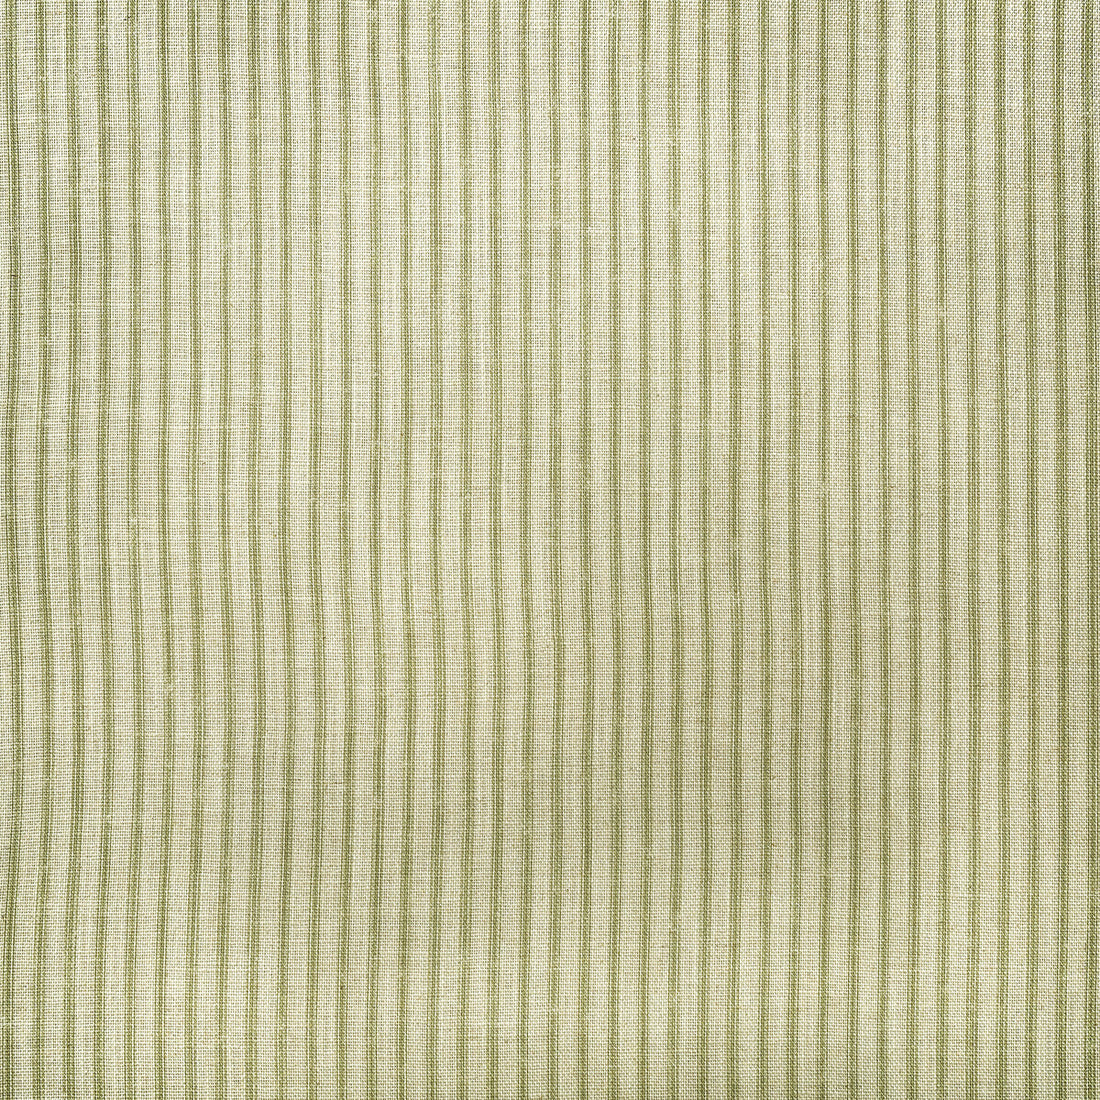 Picket fabric in leaf color - pattern AM100382.3.0 - by Kravet Couture in the Andrew Martin Garden Path collection